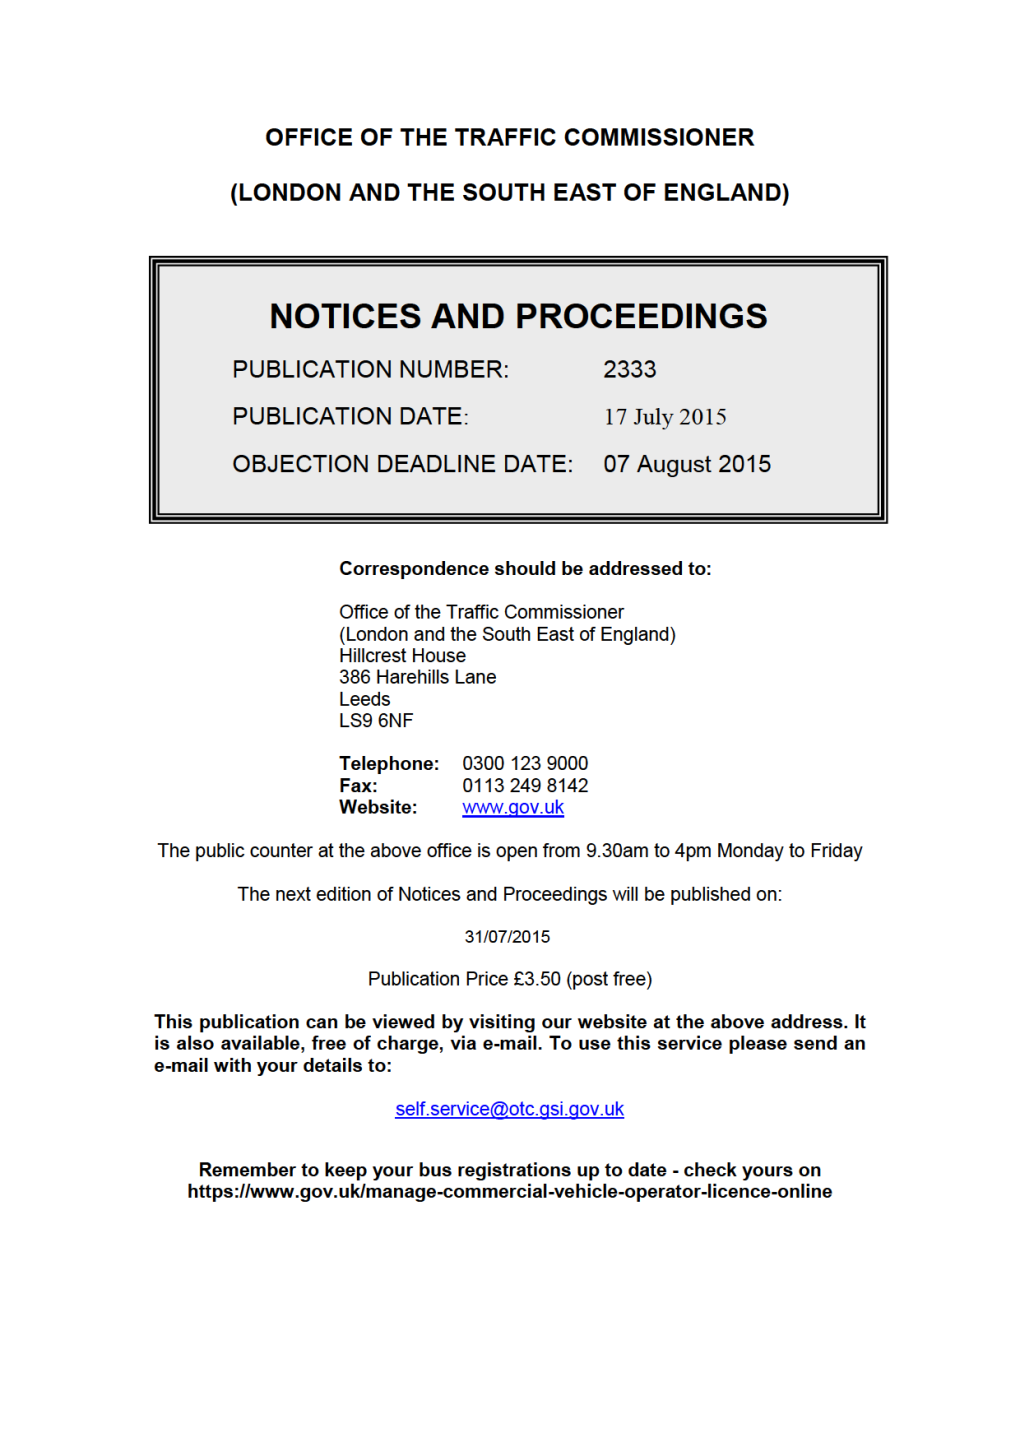 NOTICES and PROCEEDINGS 17 July 2015